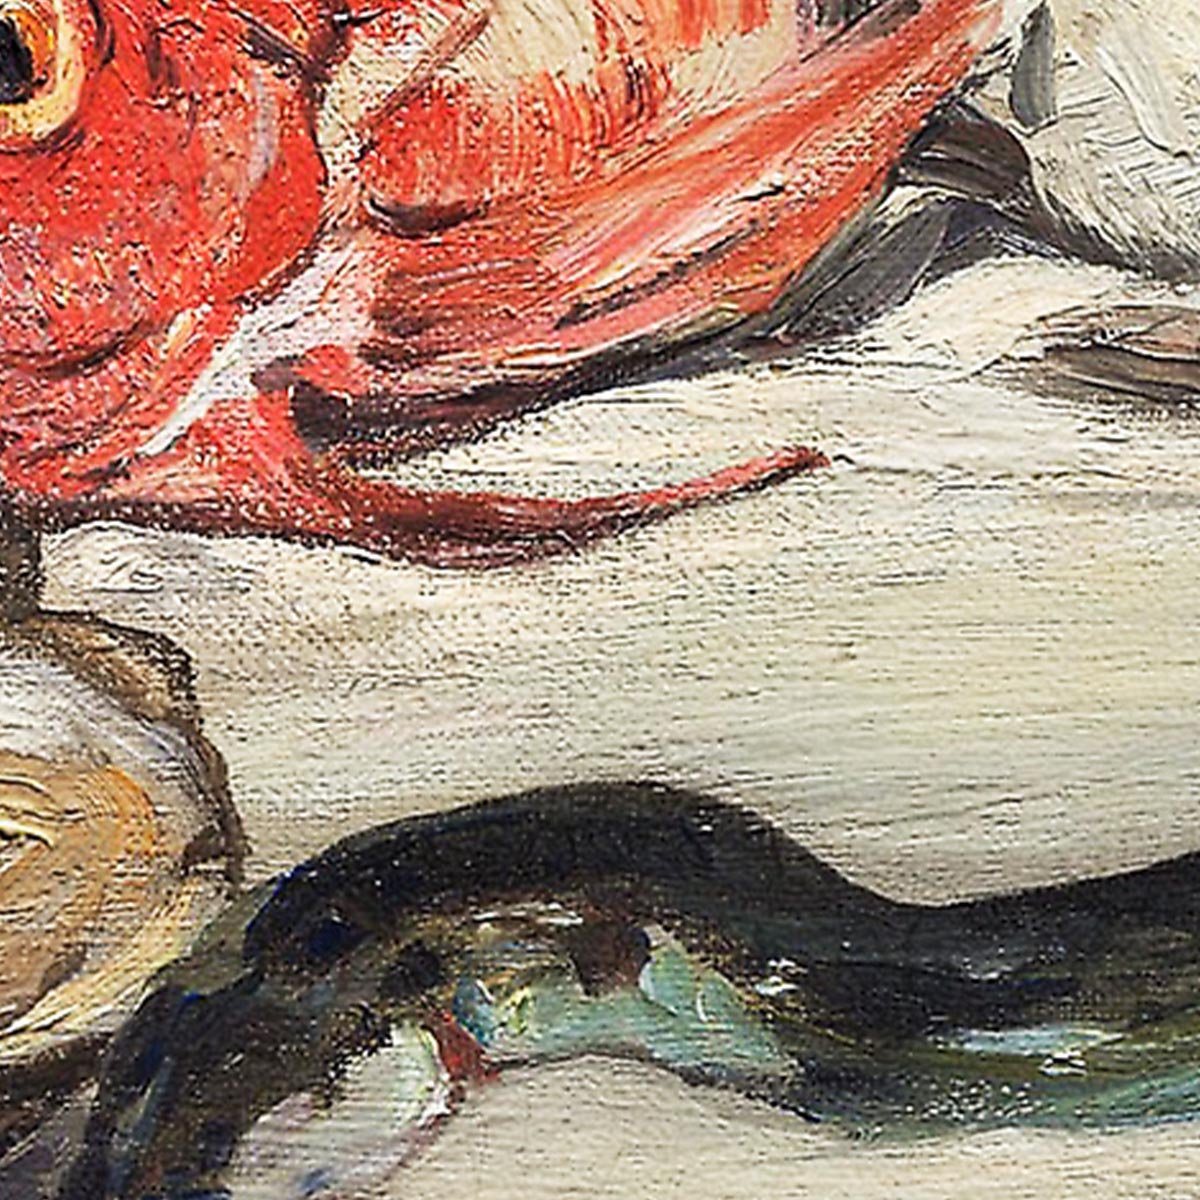 Fish (Still Life) by Manet Exhibition Poster